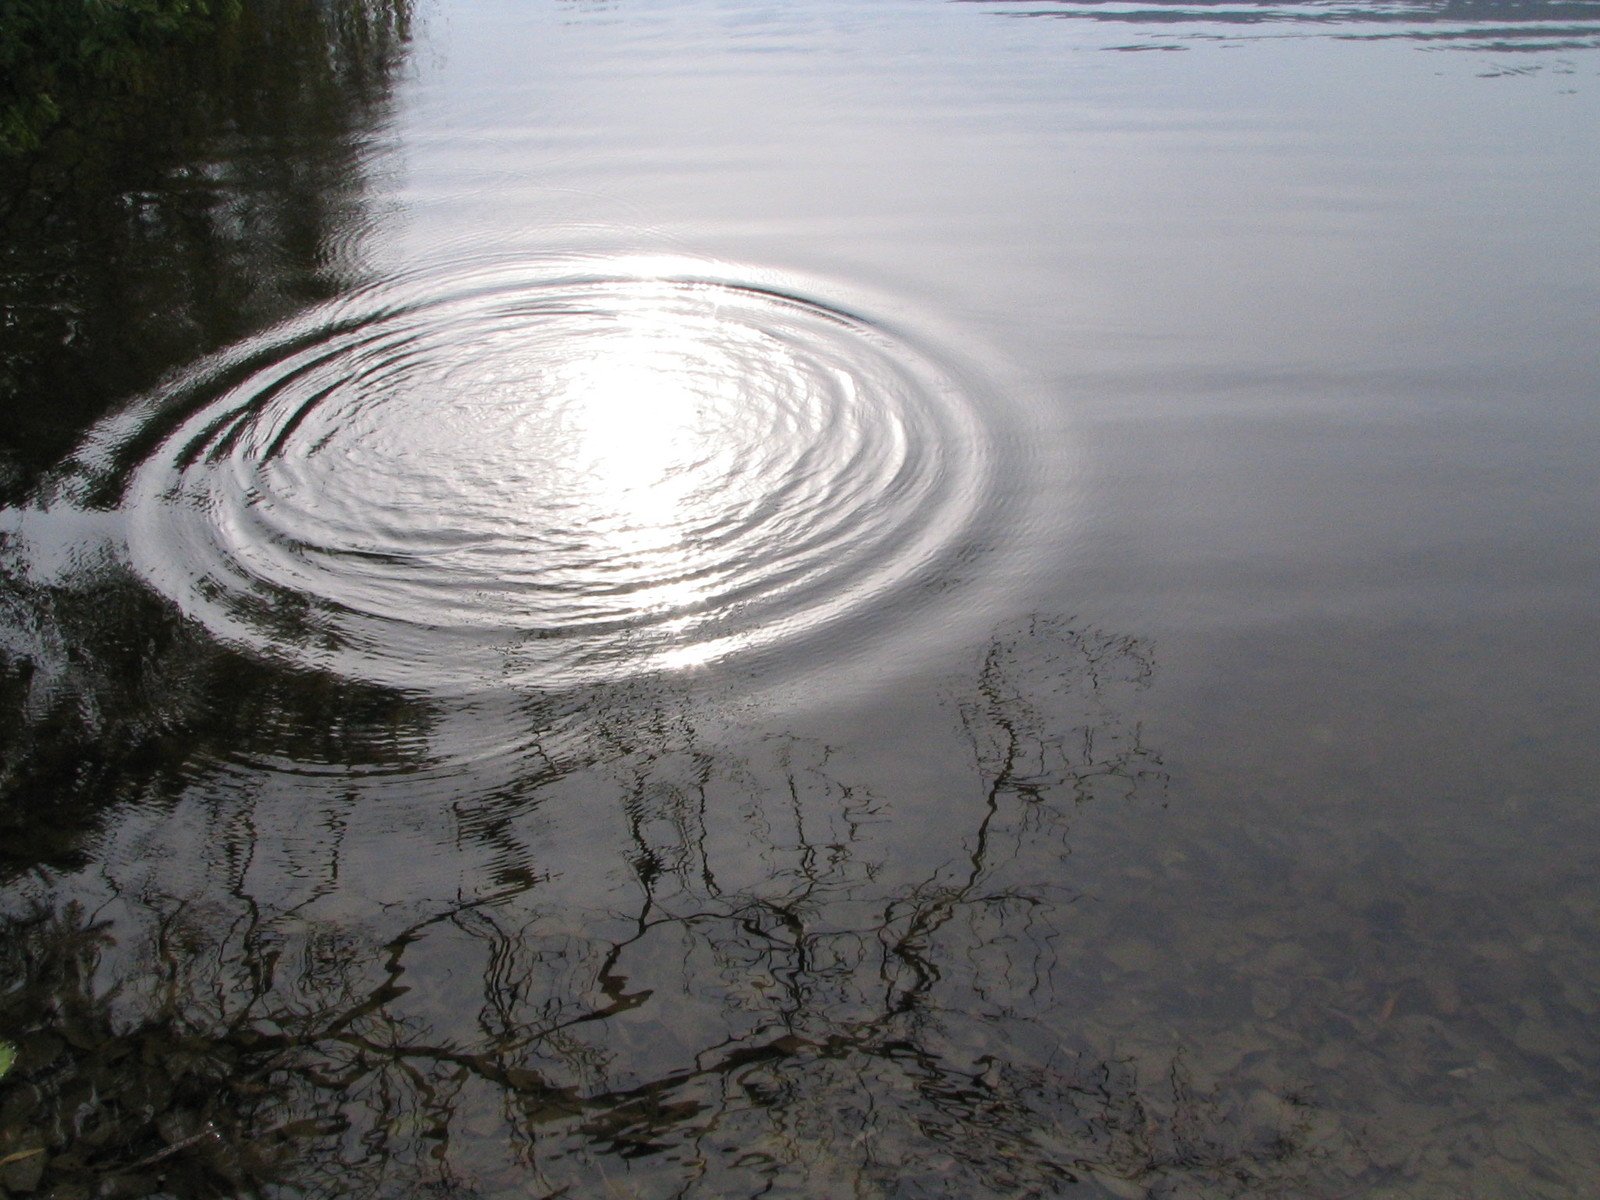 the circles of the ripple are reflected in the water